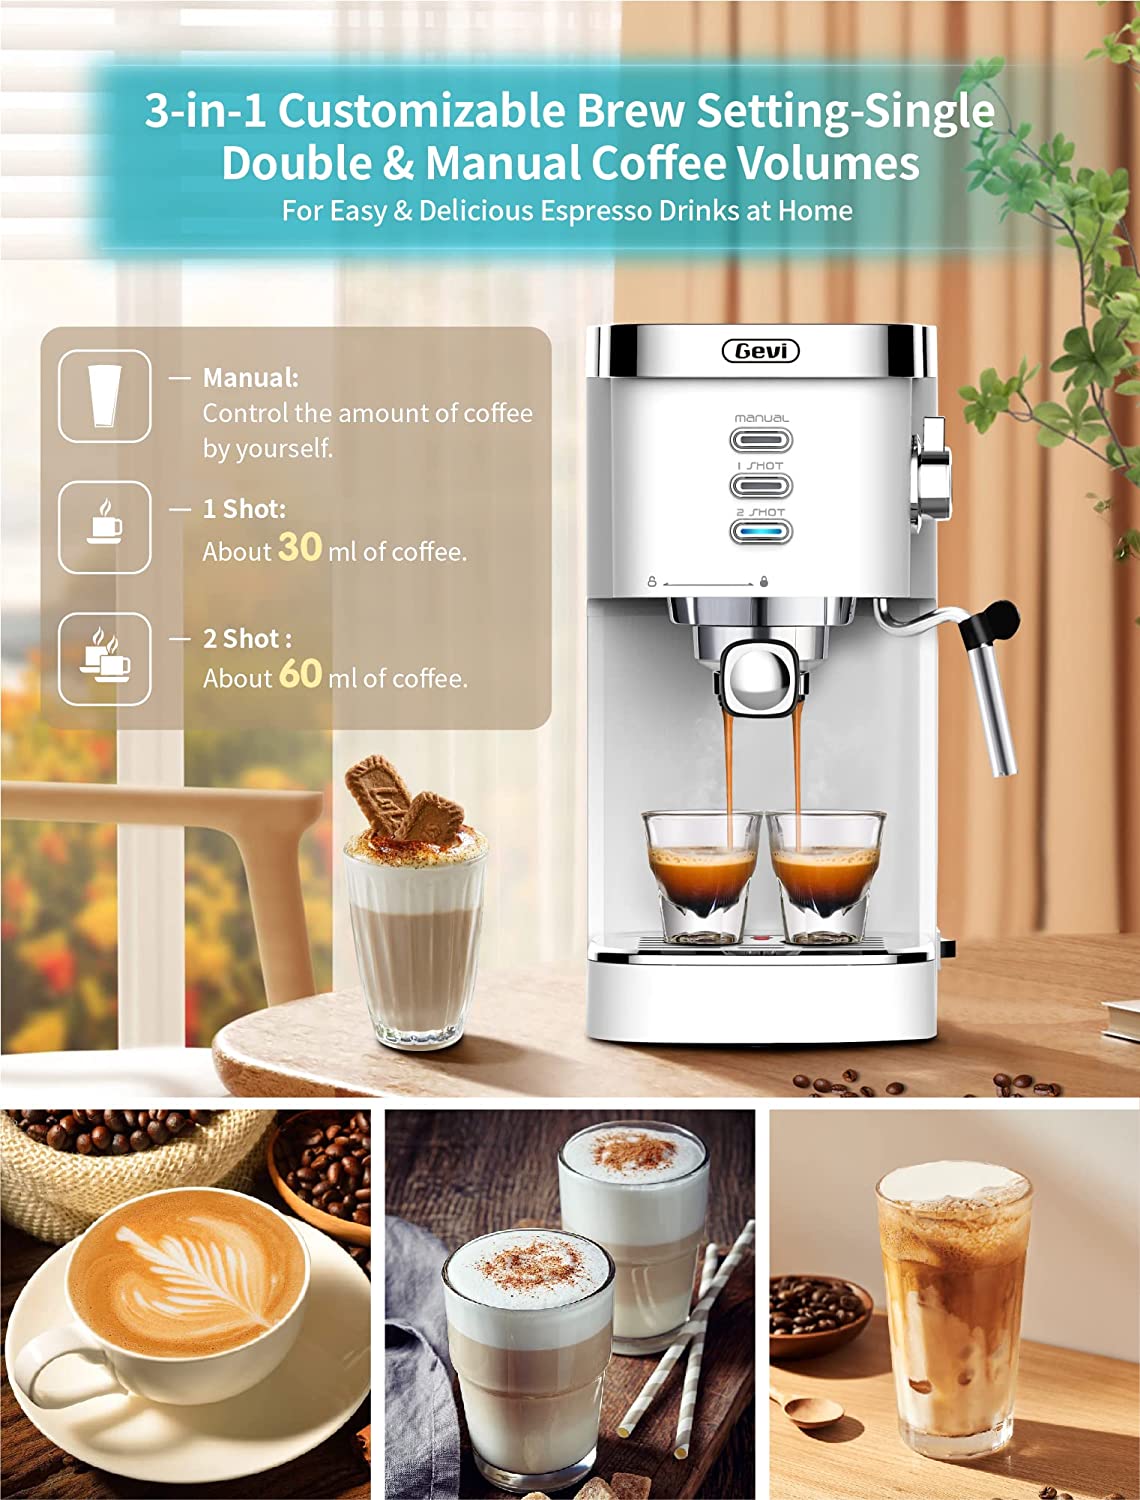 Fully Automatic Espresso Machine, Cappuccino Coffee Maker with Foaming Milk  Frother Wand for Espresso - Designed for home, office, or coffee use